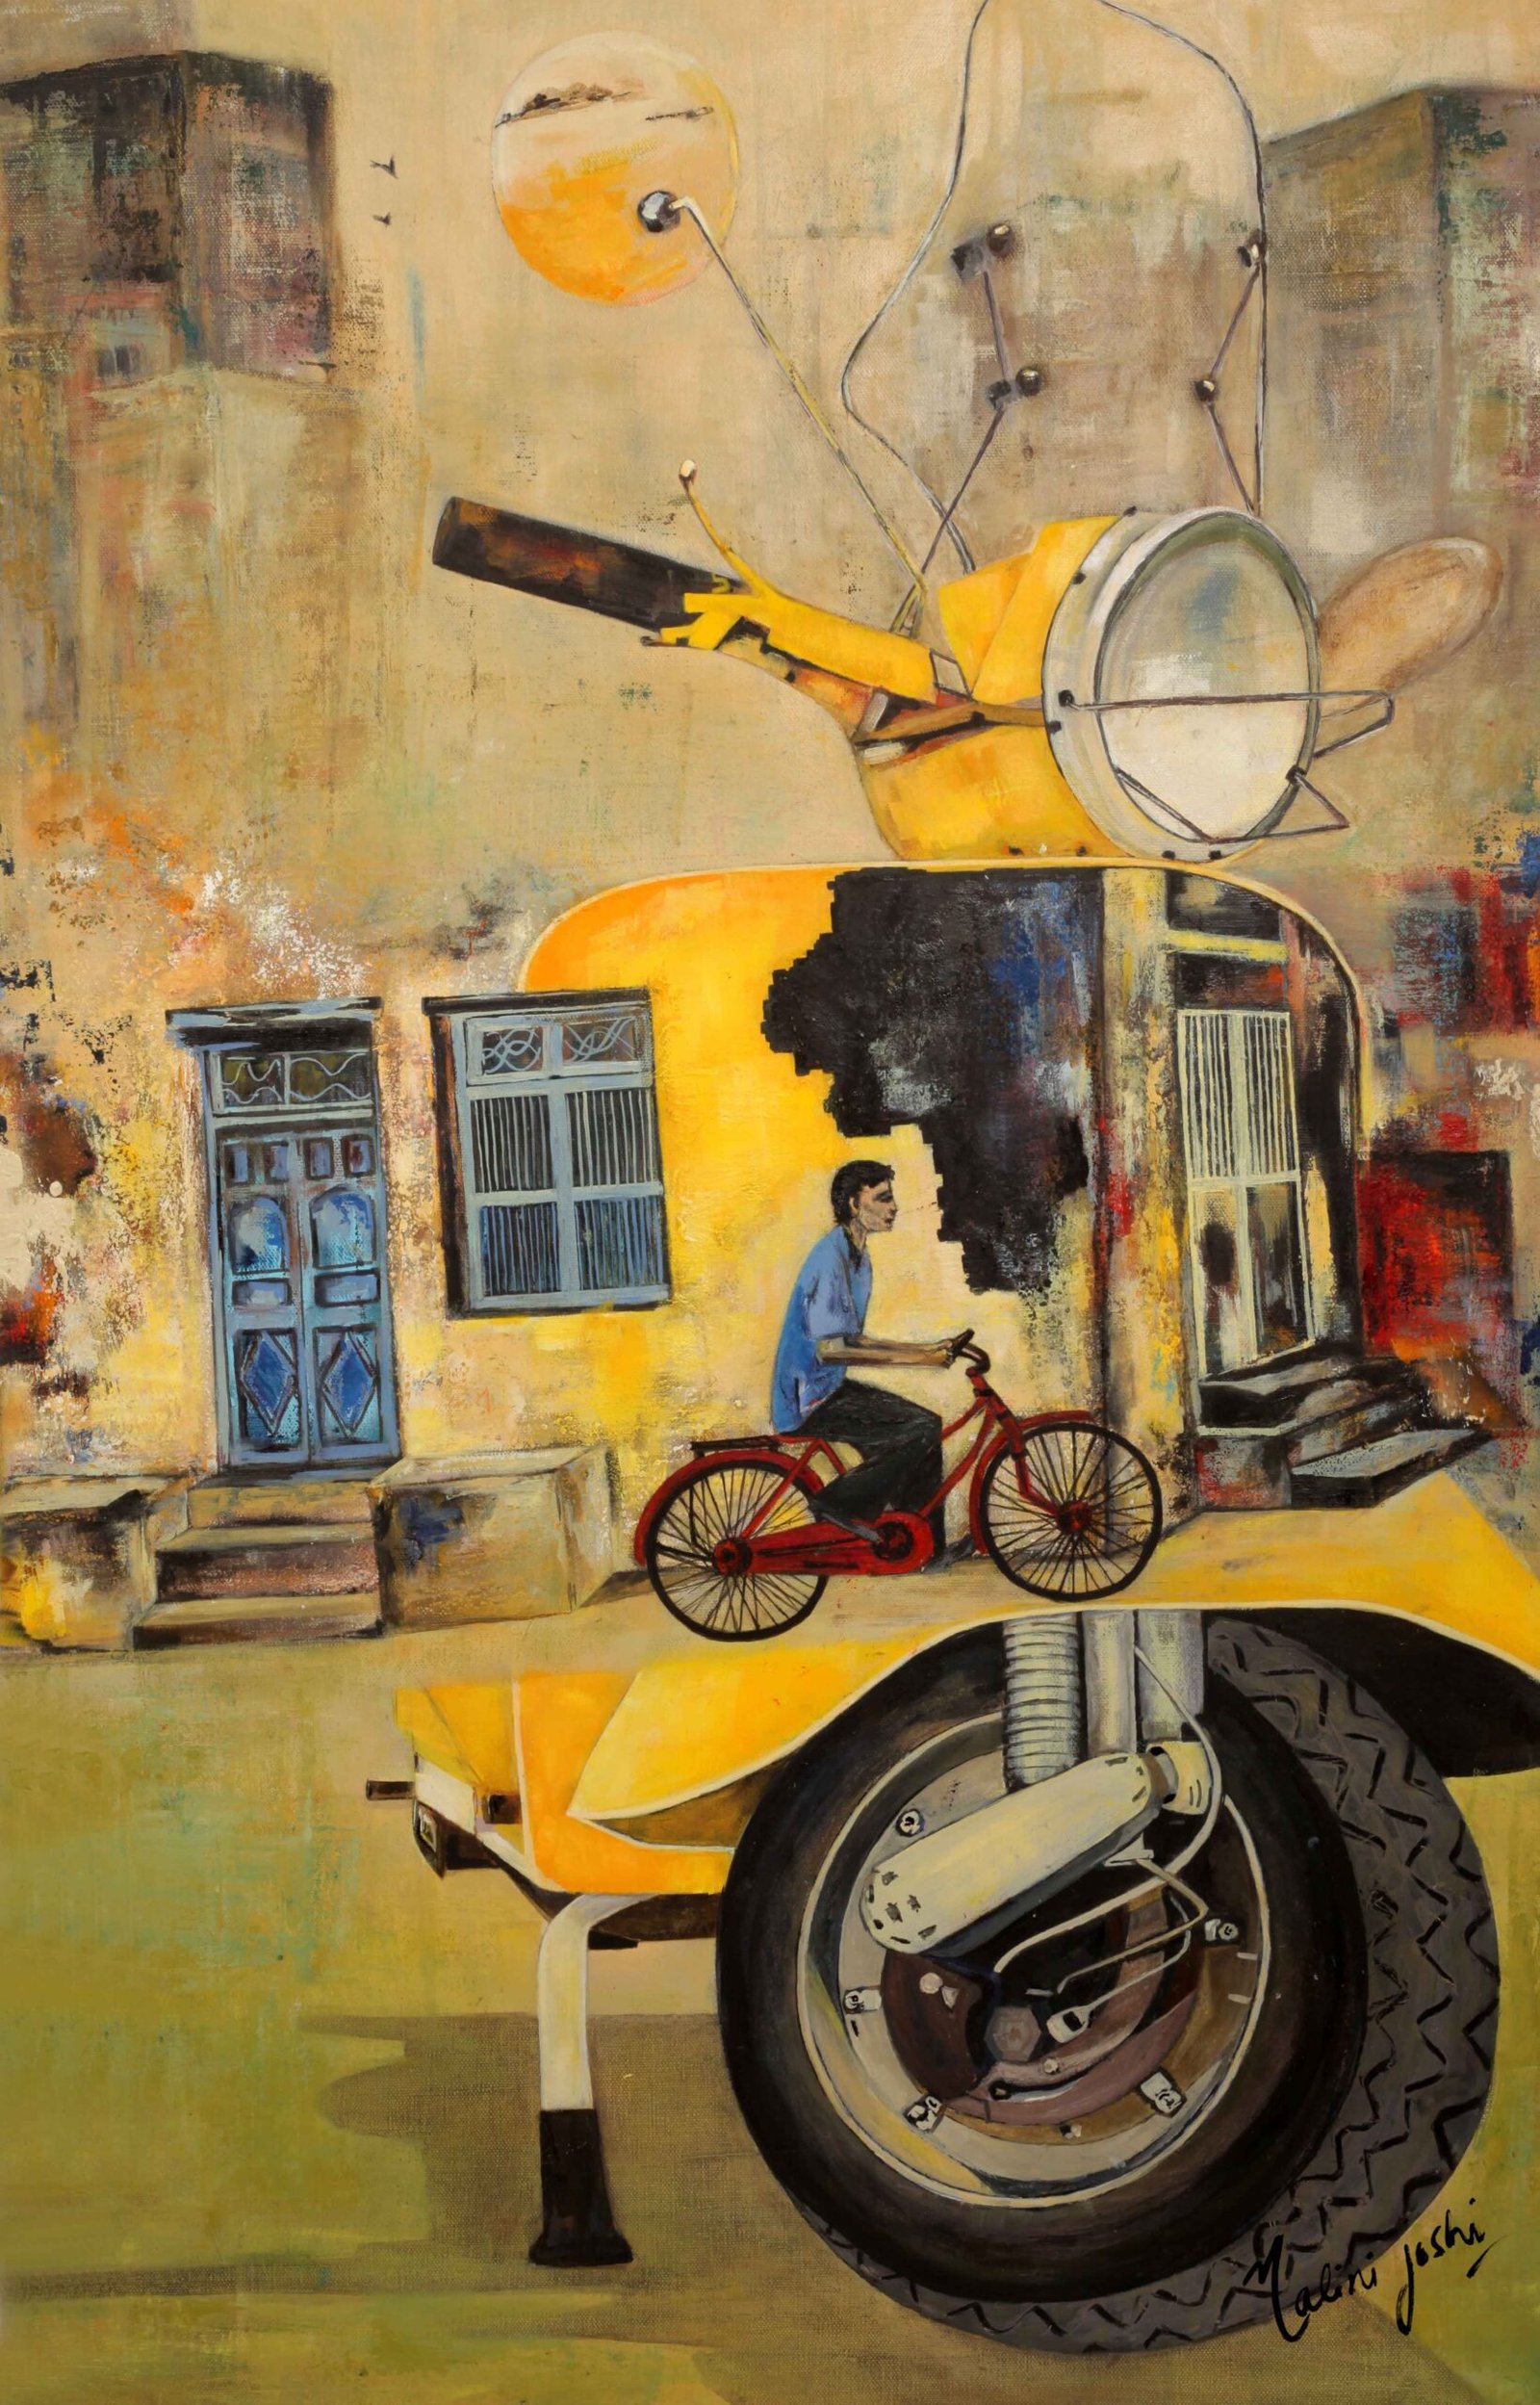 <em><strong>'Nostalgia - Vespa Series' </strong></em> <br/><br/> 22x36 inches <br/> Mixed Media and Oil on Canvas<br/>MMC2004<br/><strong>'SOLD OUT'</strong><br/>